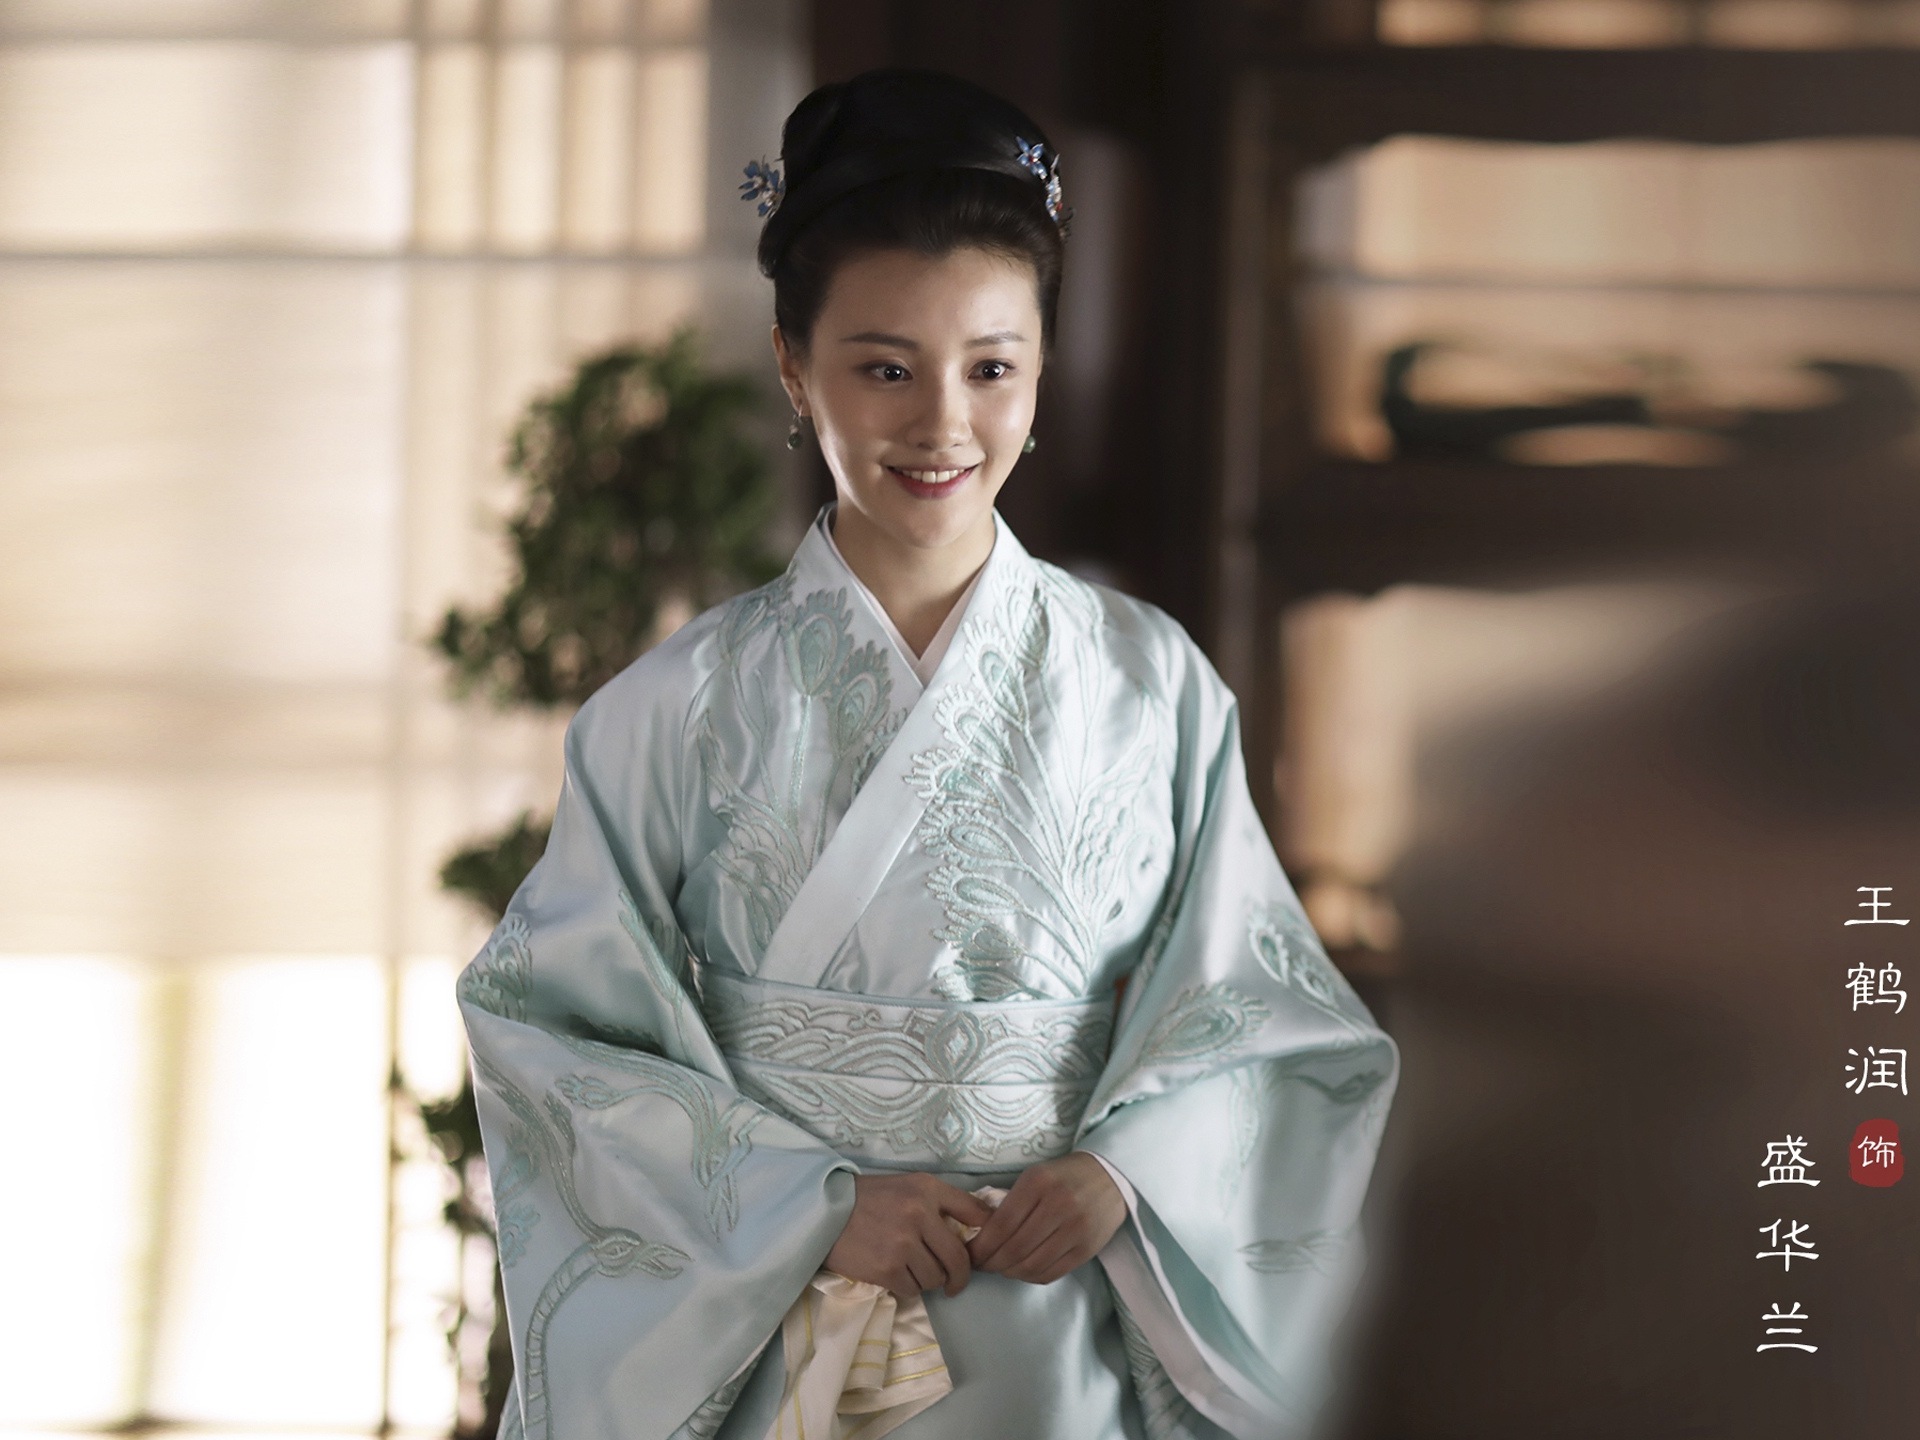 The Story Of MingLan, TV series HD wallpapers #31 - 1920x1440